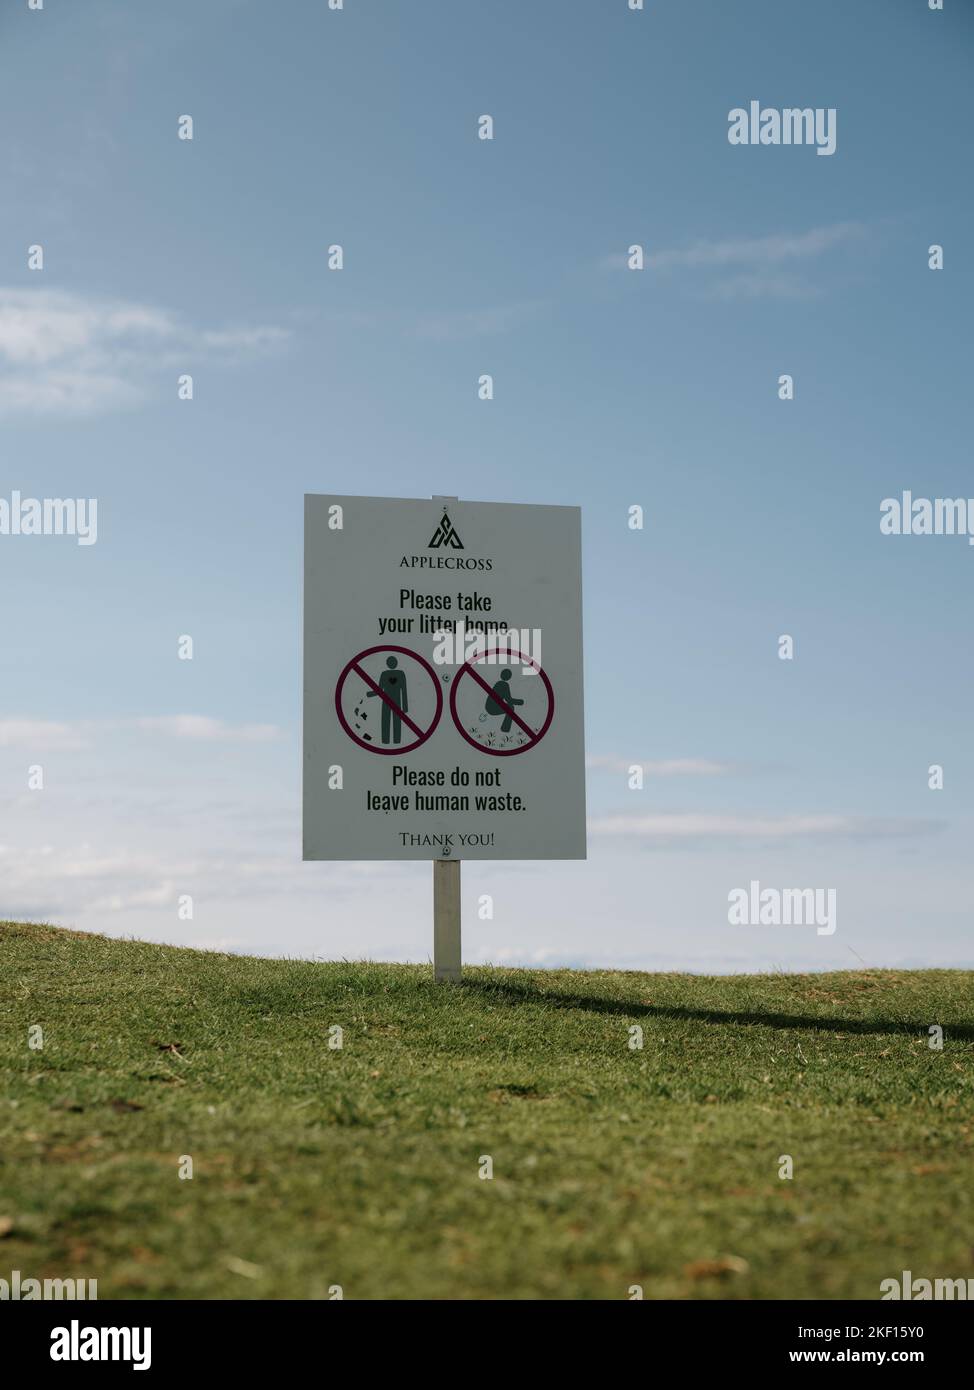 Please take your litter home - do not leave human waste sign in the west coast Scotland summer landscape - overtourism tourist problem Stock Photo